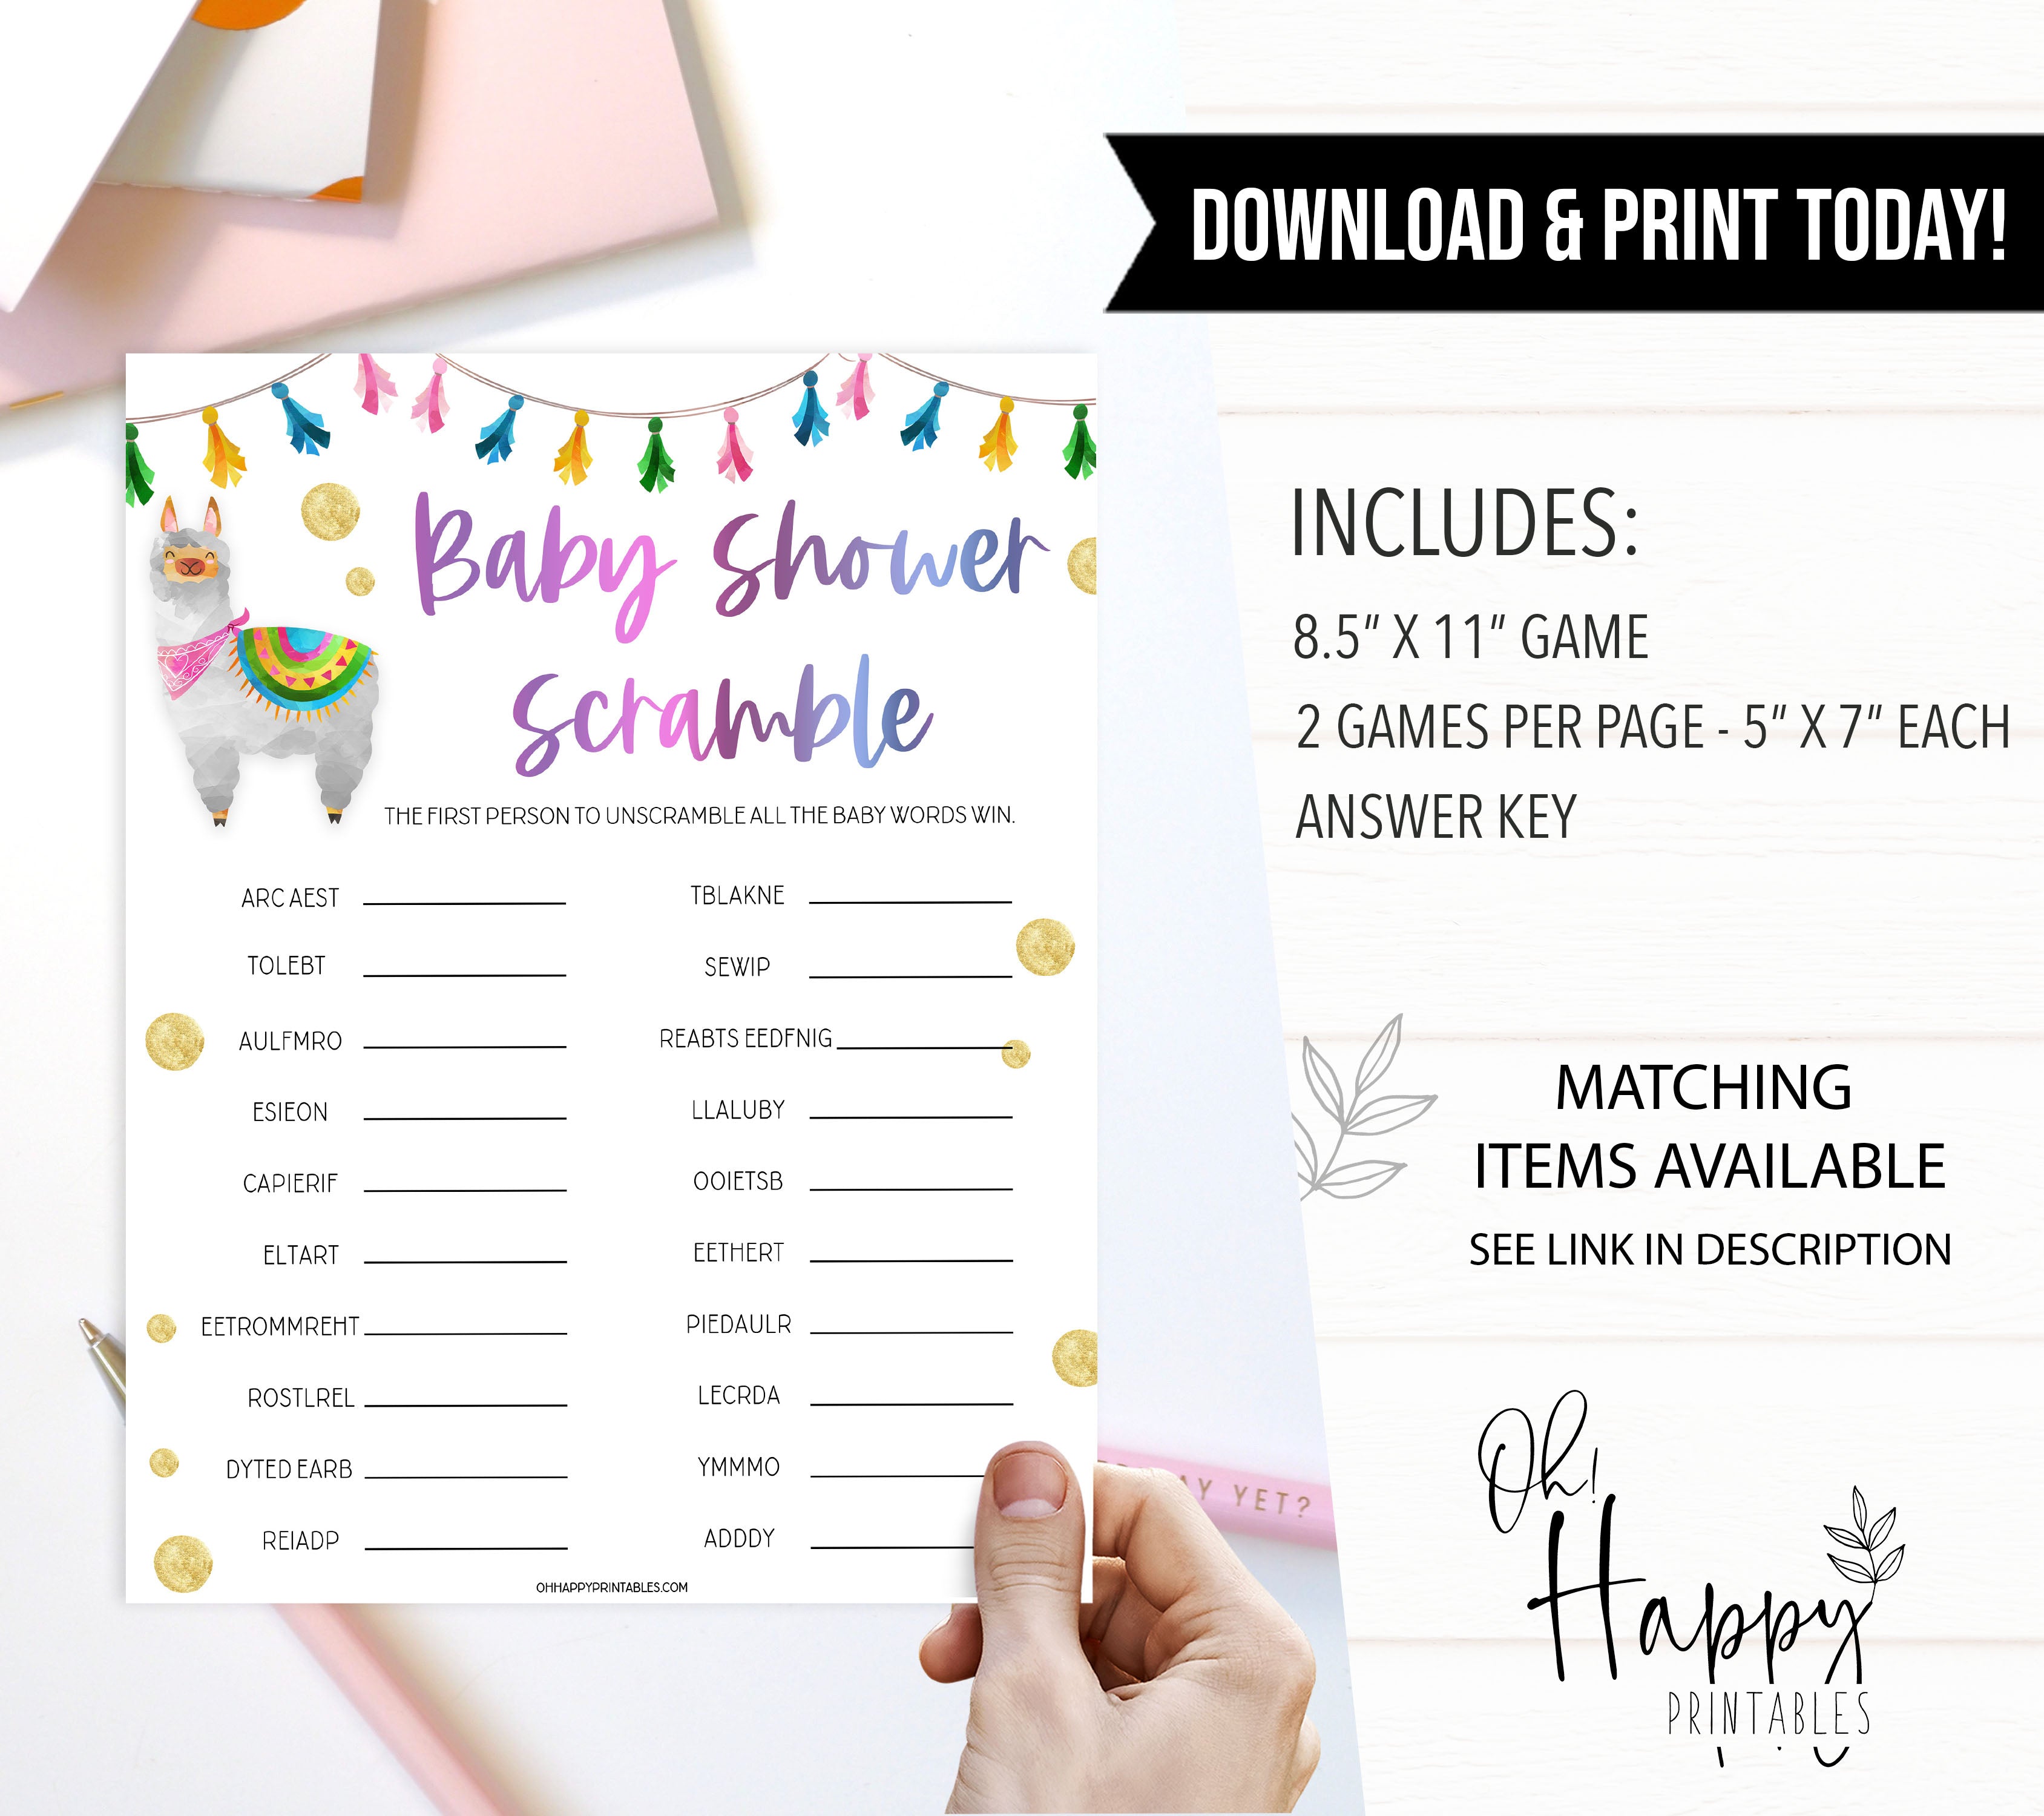 baby shower scramble game, Printable baby shower games, llama fiesta fun baby games, baby shower games, fun baby shower ideas, top baby shower ideas, Llama fiesta shower baby shower, fiesta baby shower ideas